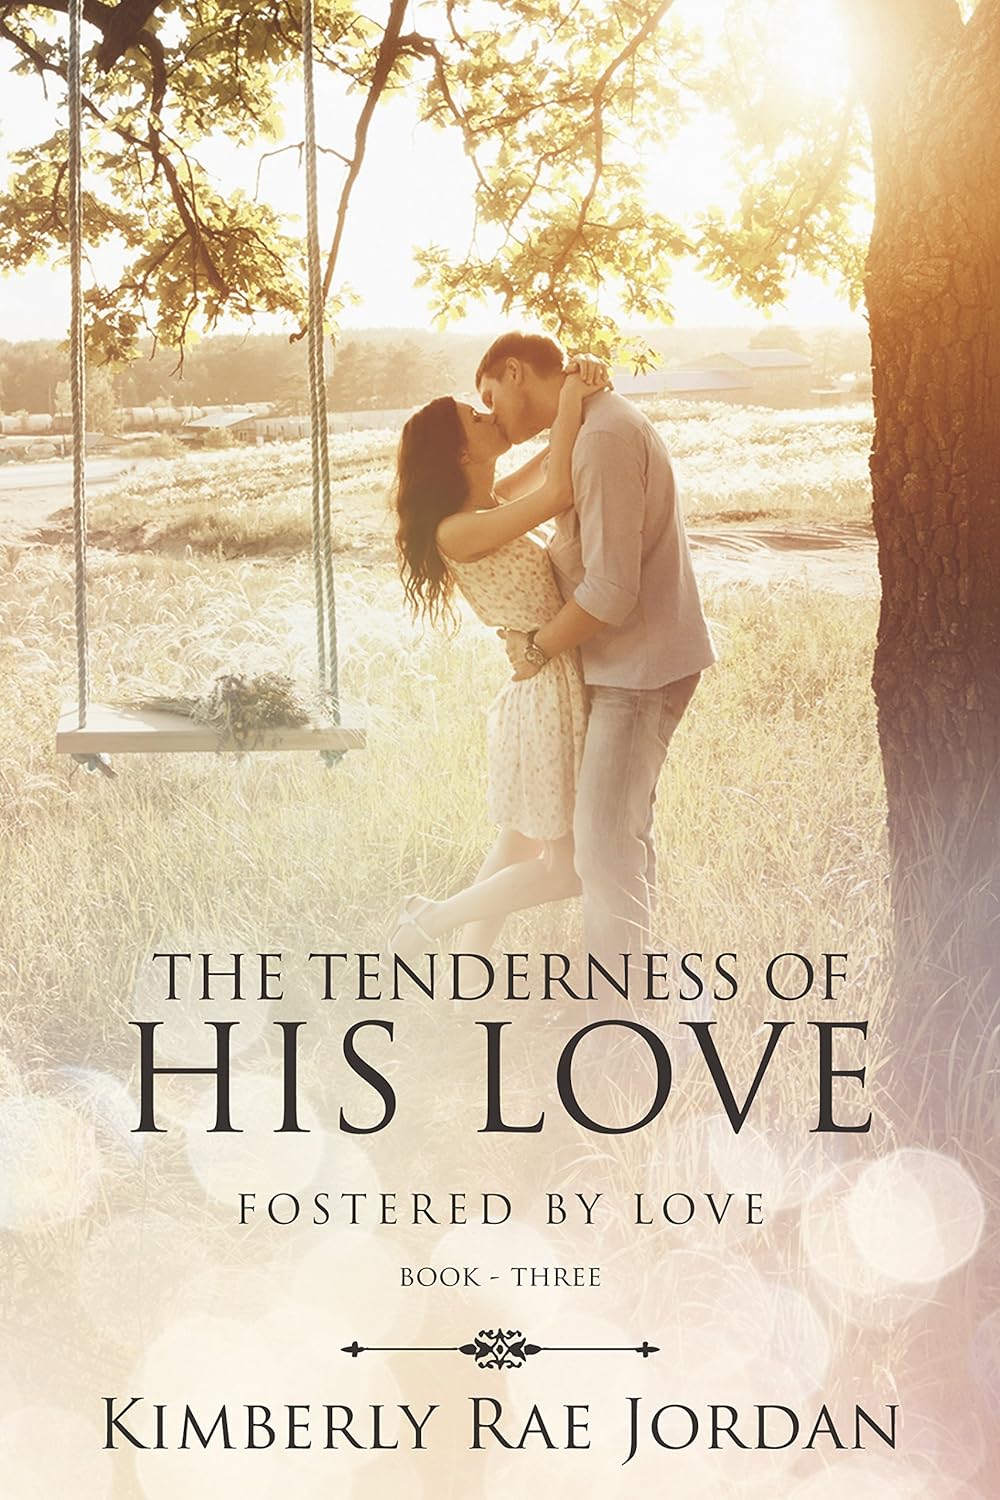 The Tenderness of His Love: A Christian Romance